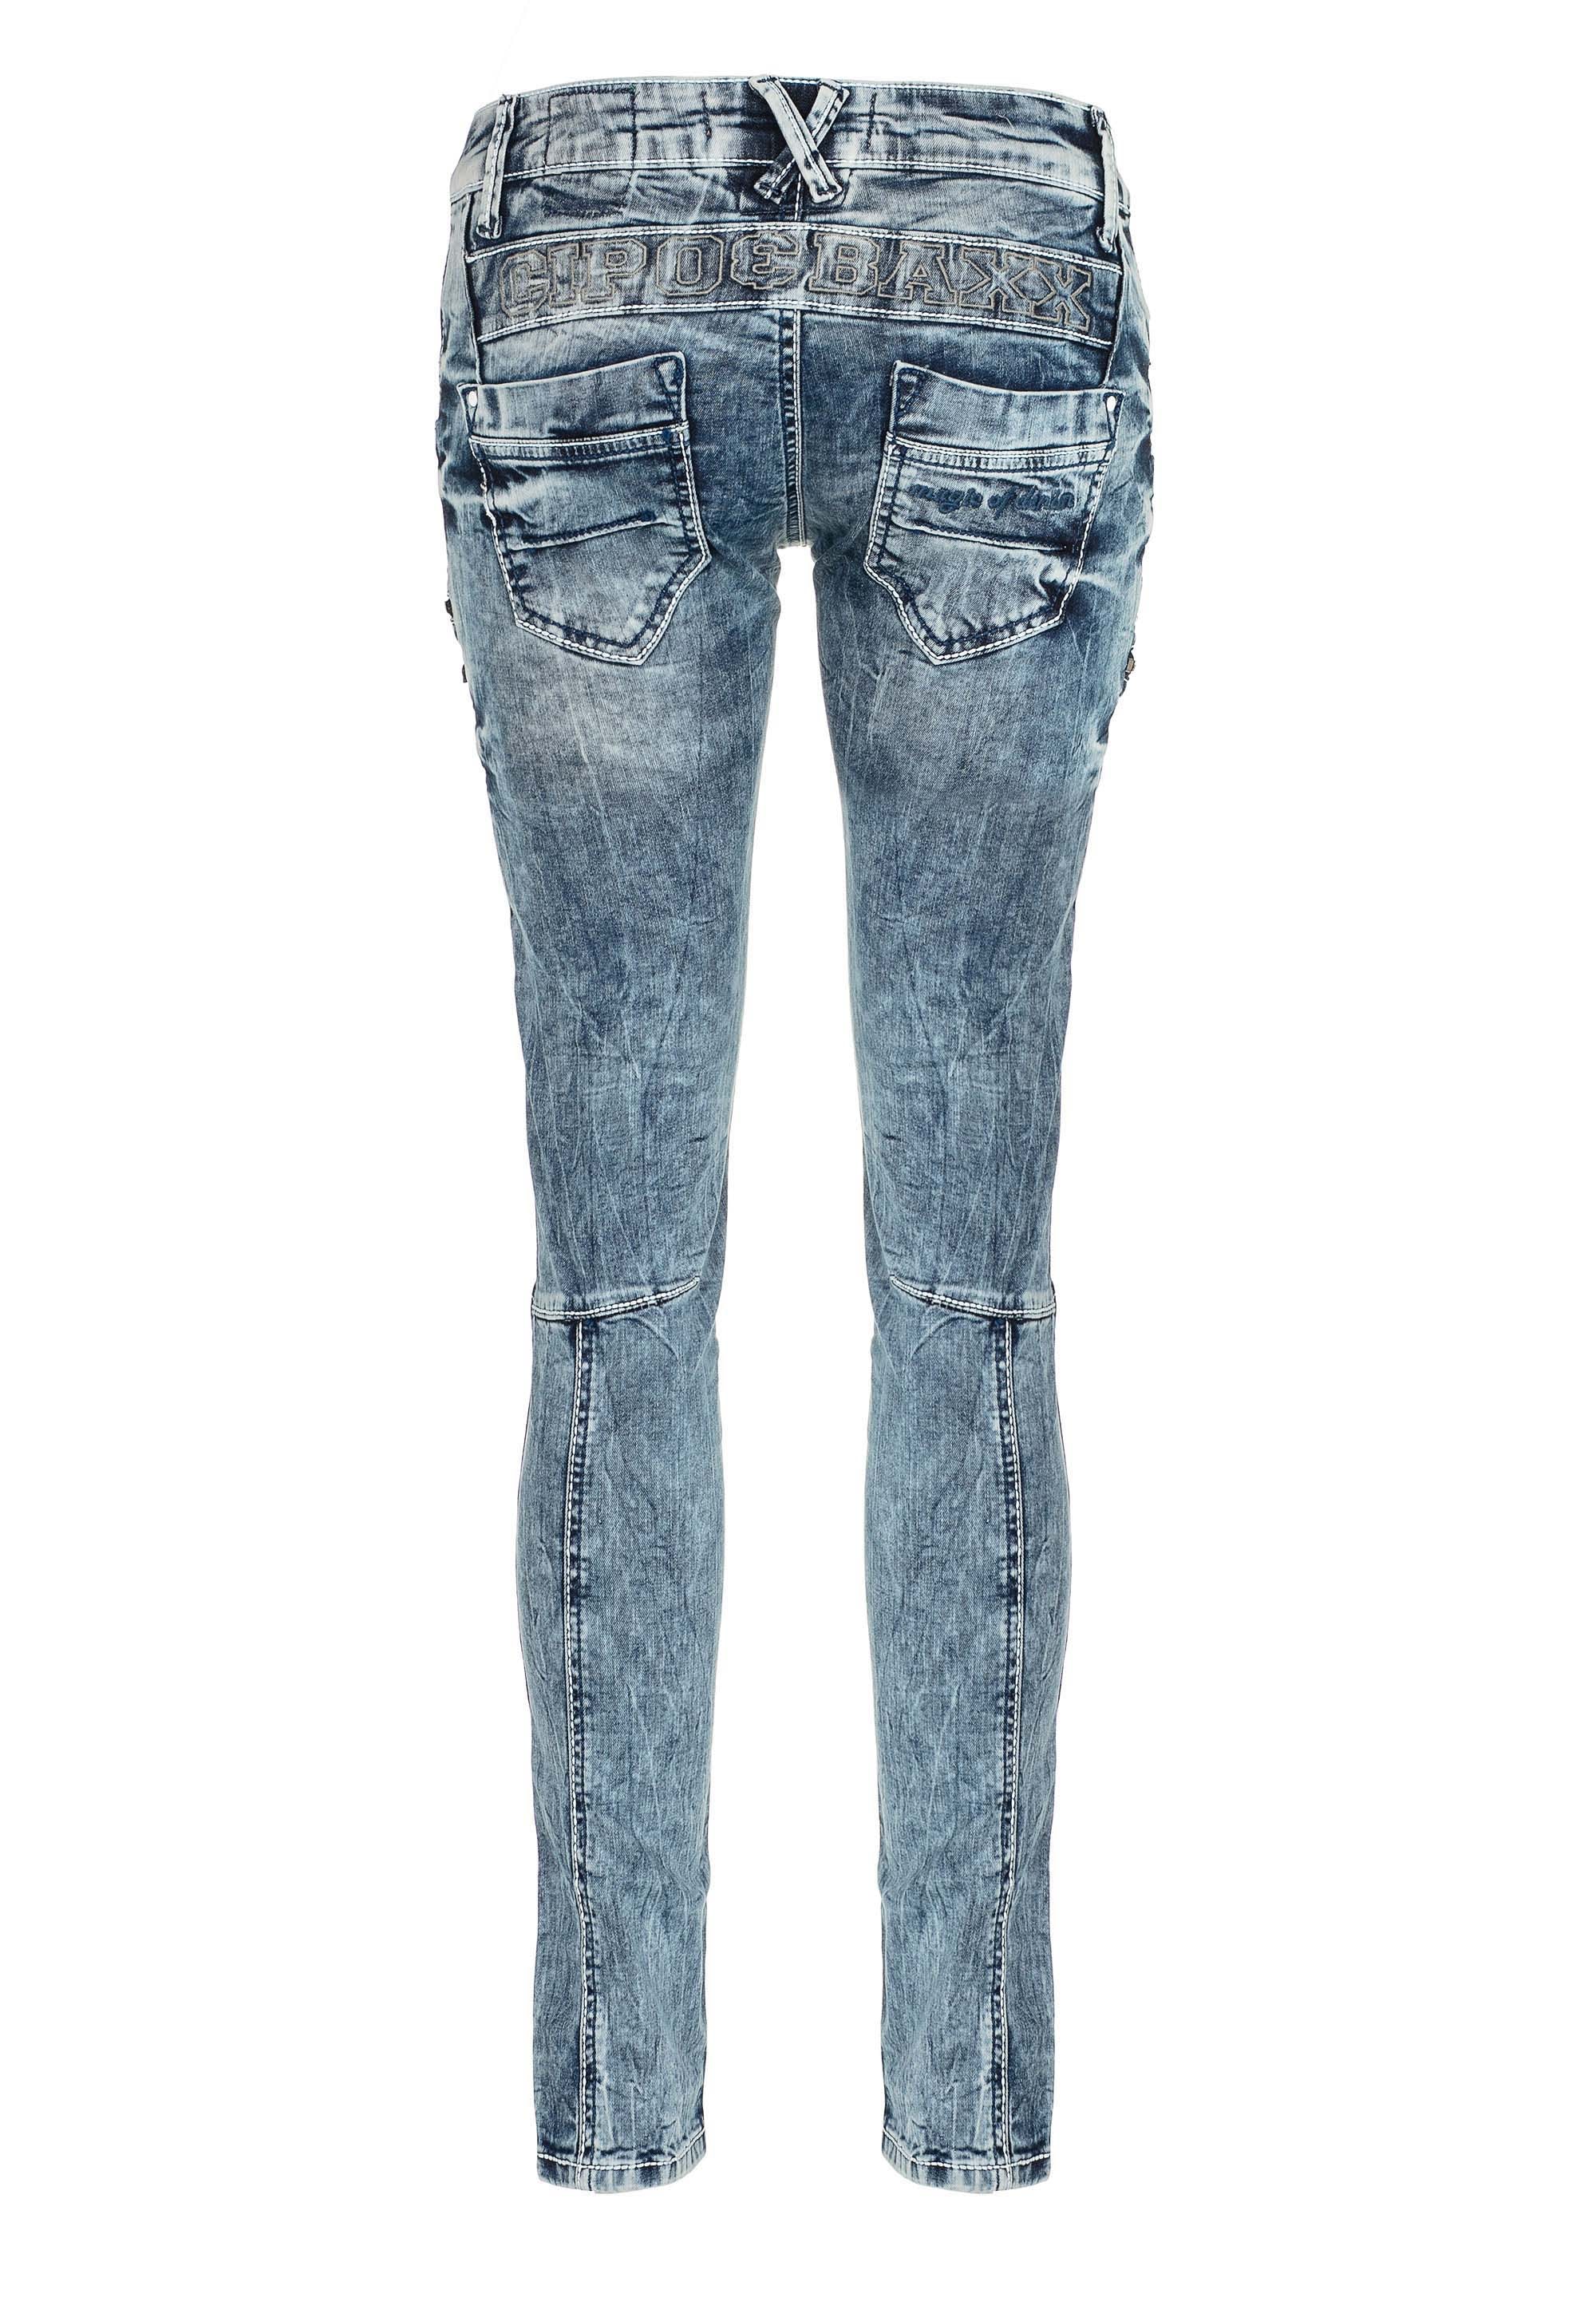 Cipo & Baxx Slim-fit-Jeans, mit niedrige Taille in Skinny Fit